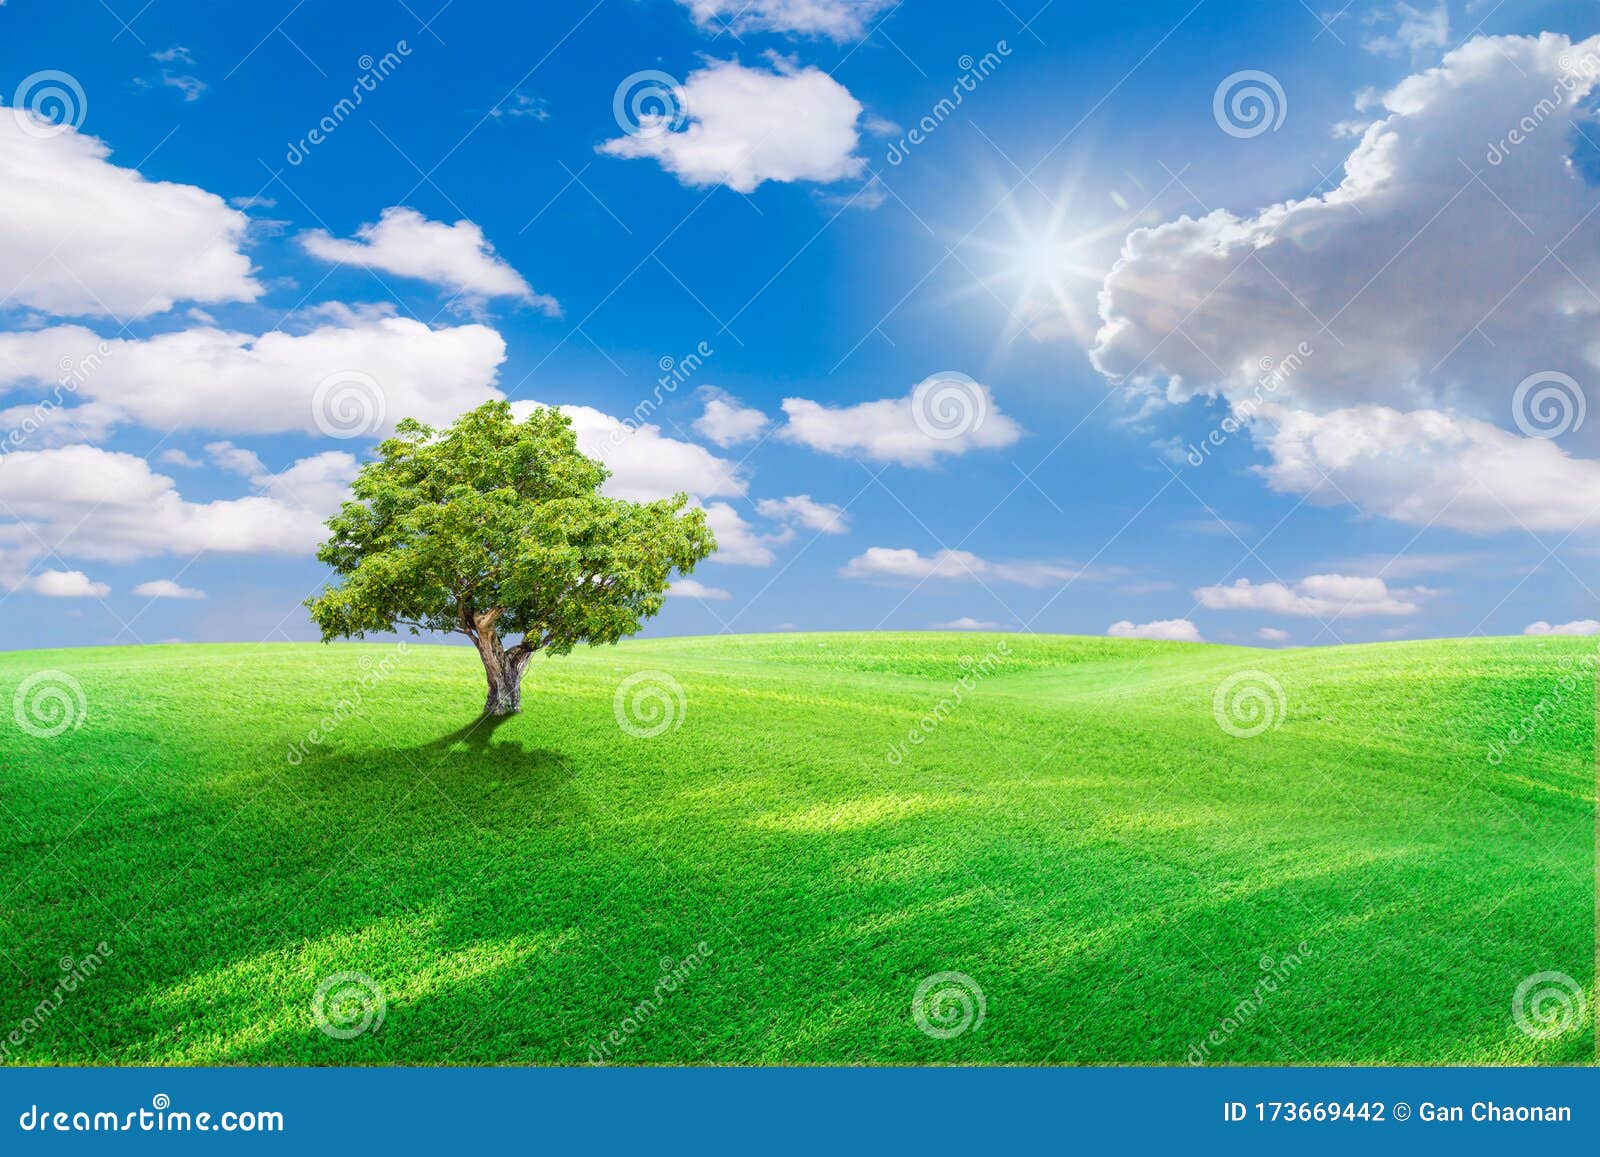 Green Field and Blue Sky with Light Clouds,Image of Green Grass ...